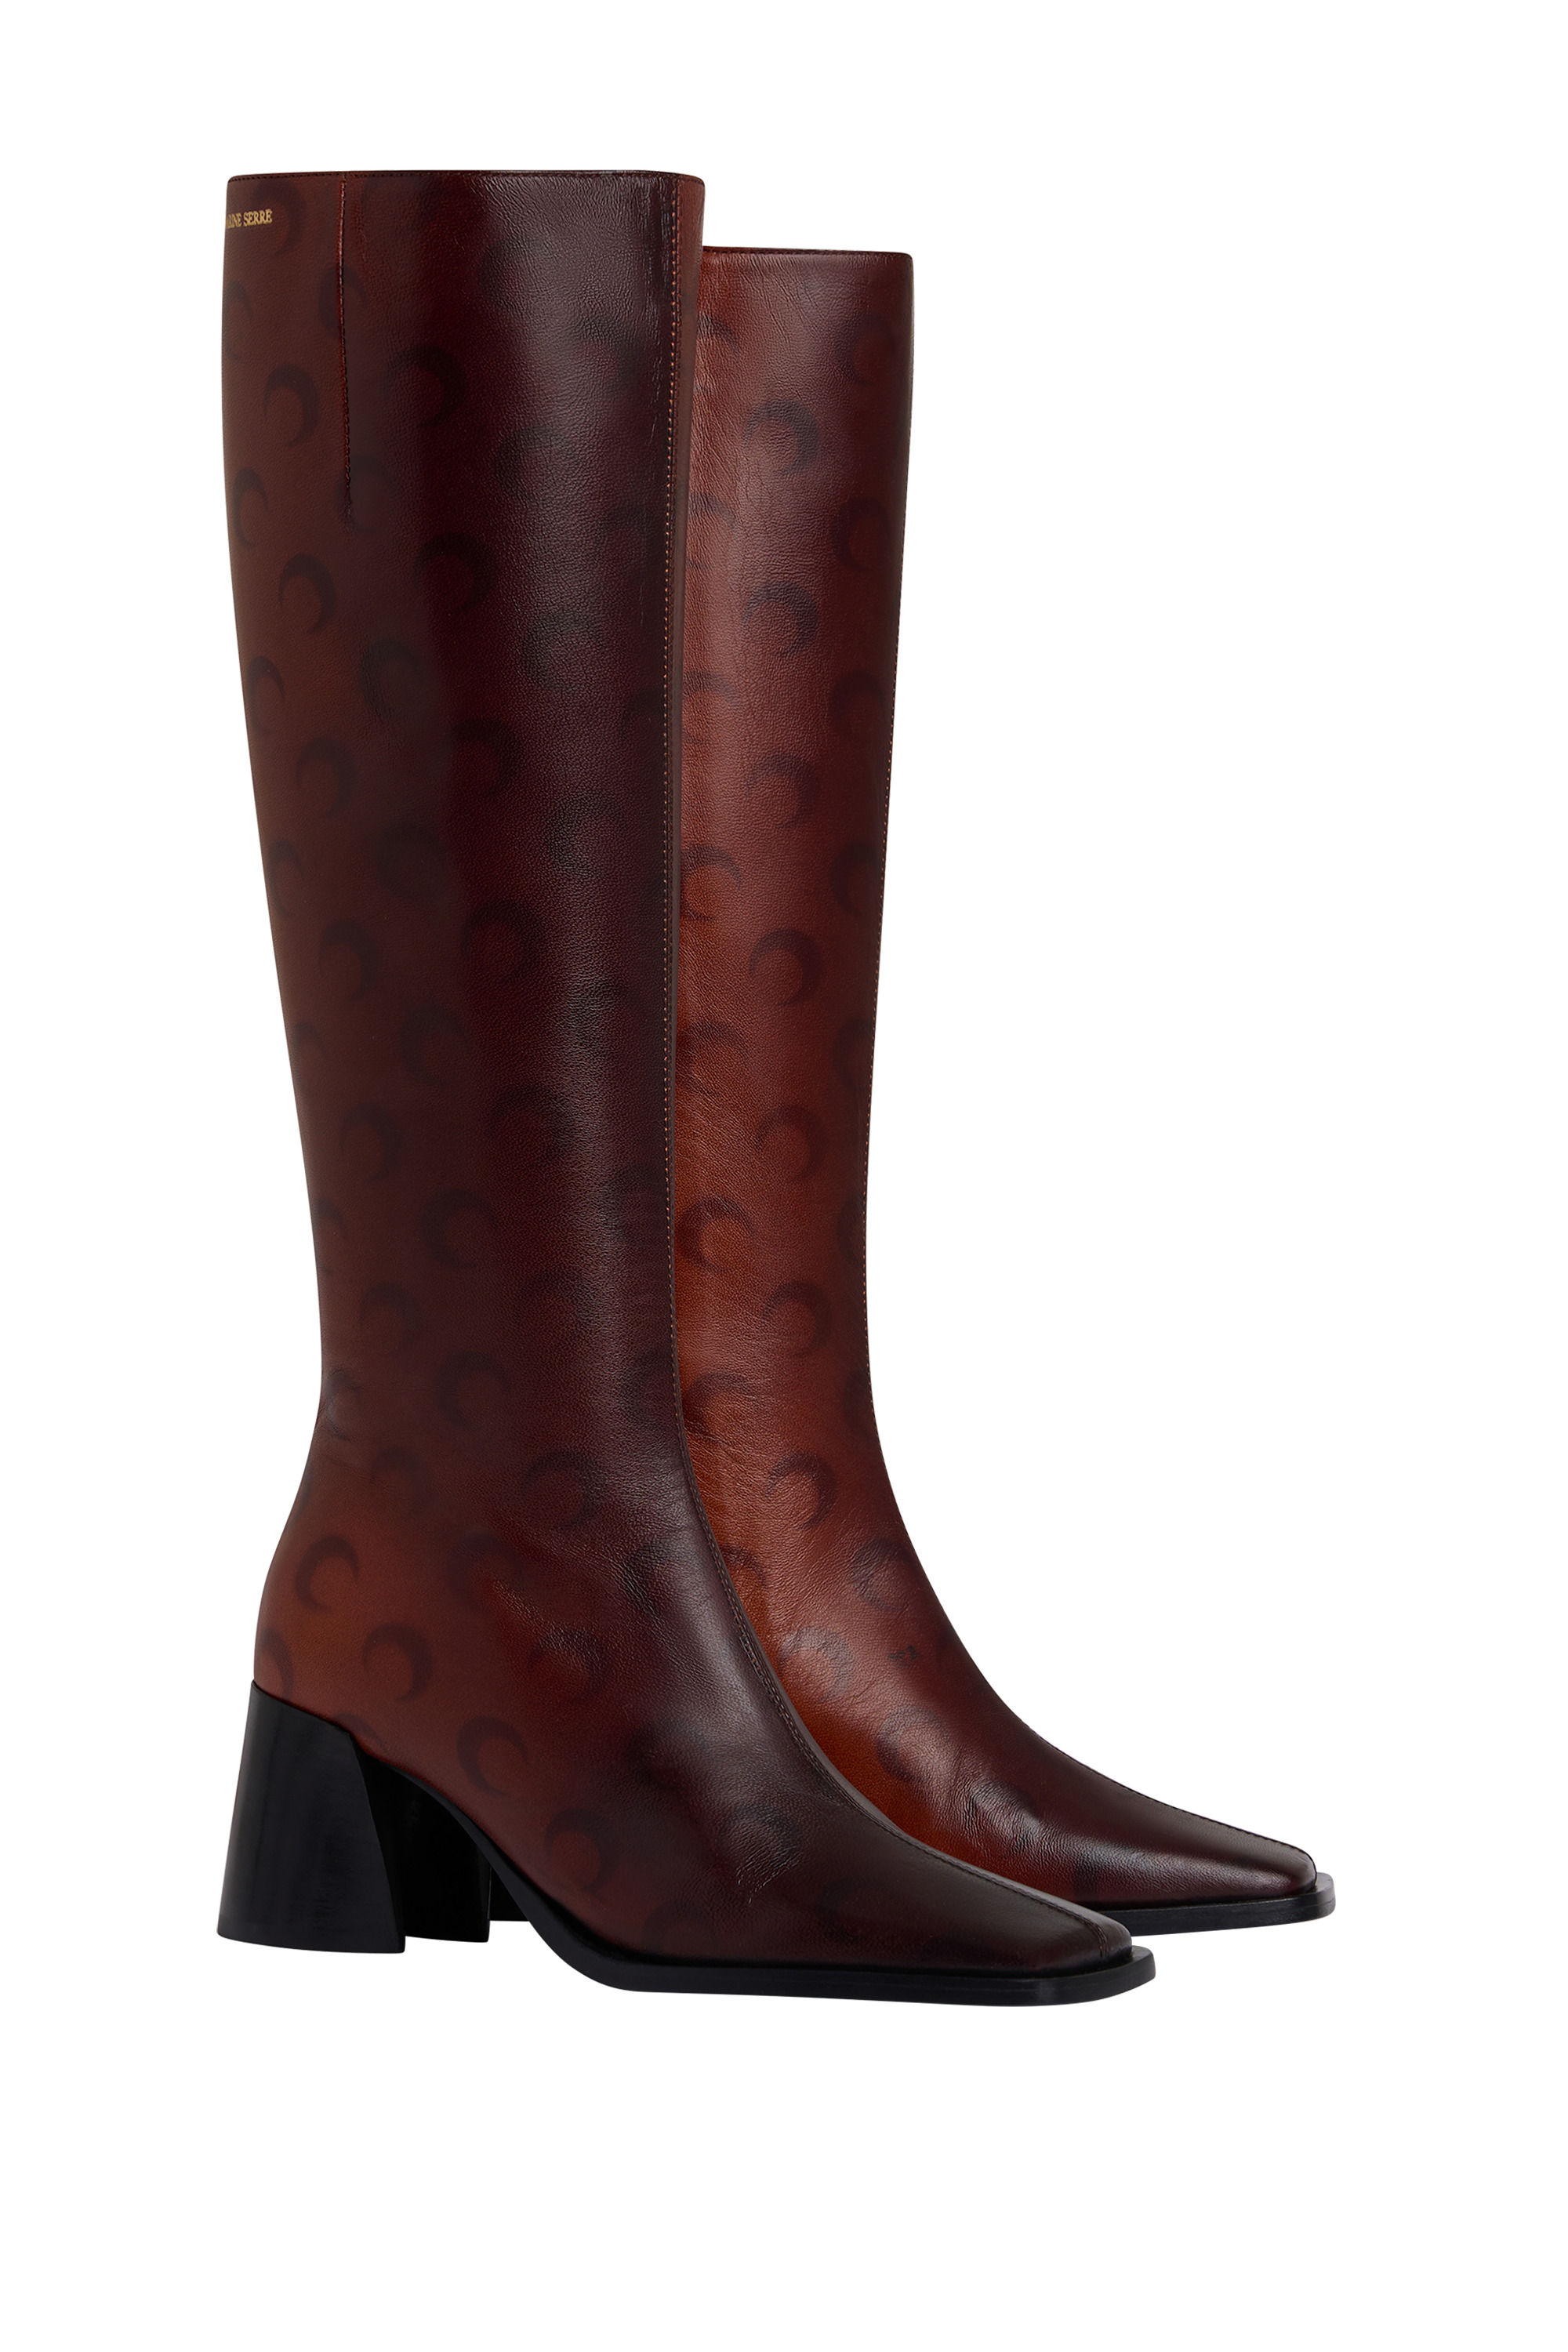 Airbrushed Crafted Leather Knee-High Boots - 2